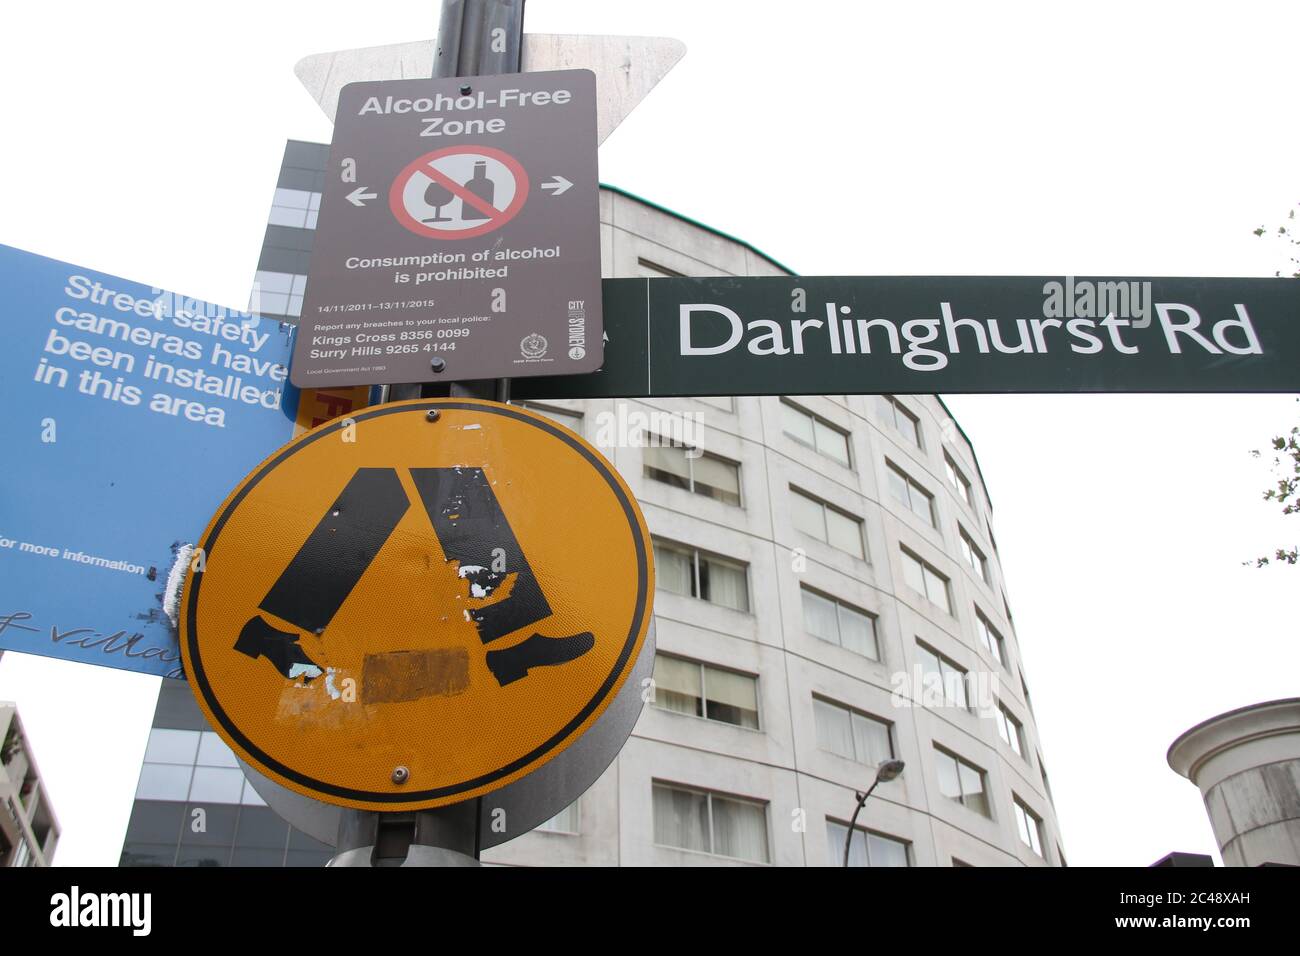 Street cameras and an alcohol free zone are two strategies adopted to deal with the problems in Darlinghurst Road, Kings Cross. Stock Photo